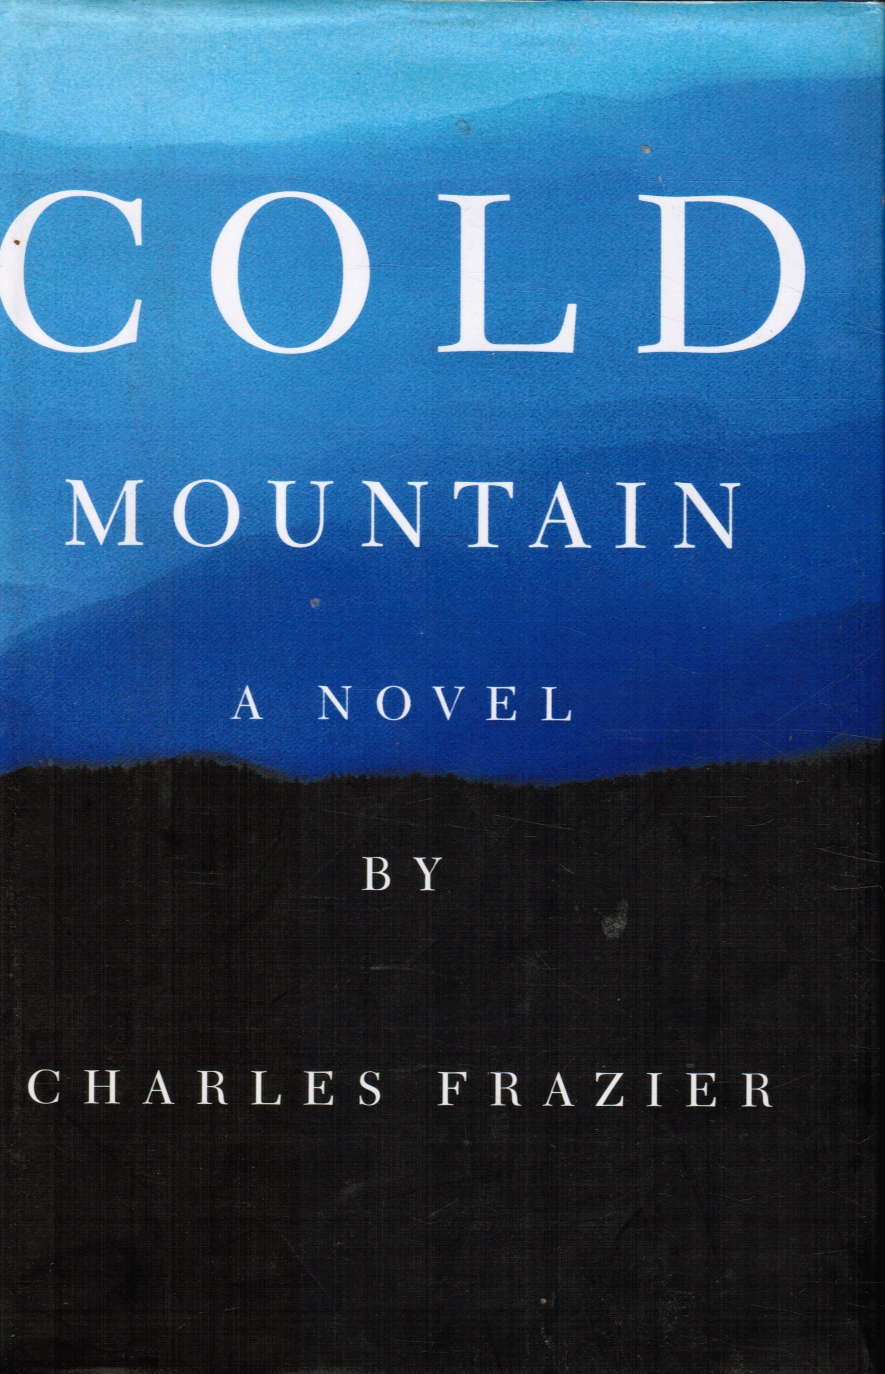 H cold. Холодная гора книга. Cold Mountain Frazier Charles. The Mountain is you книга. Холодная гора книга купить.